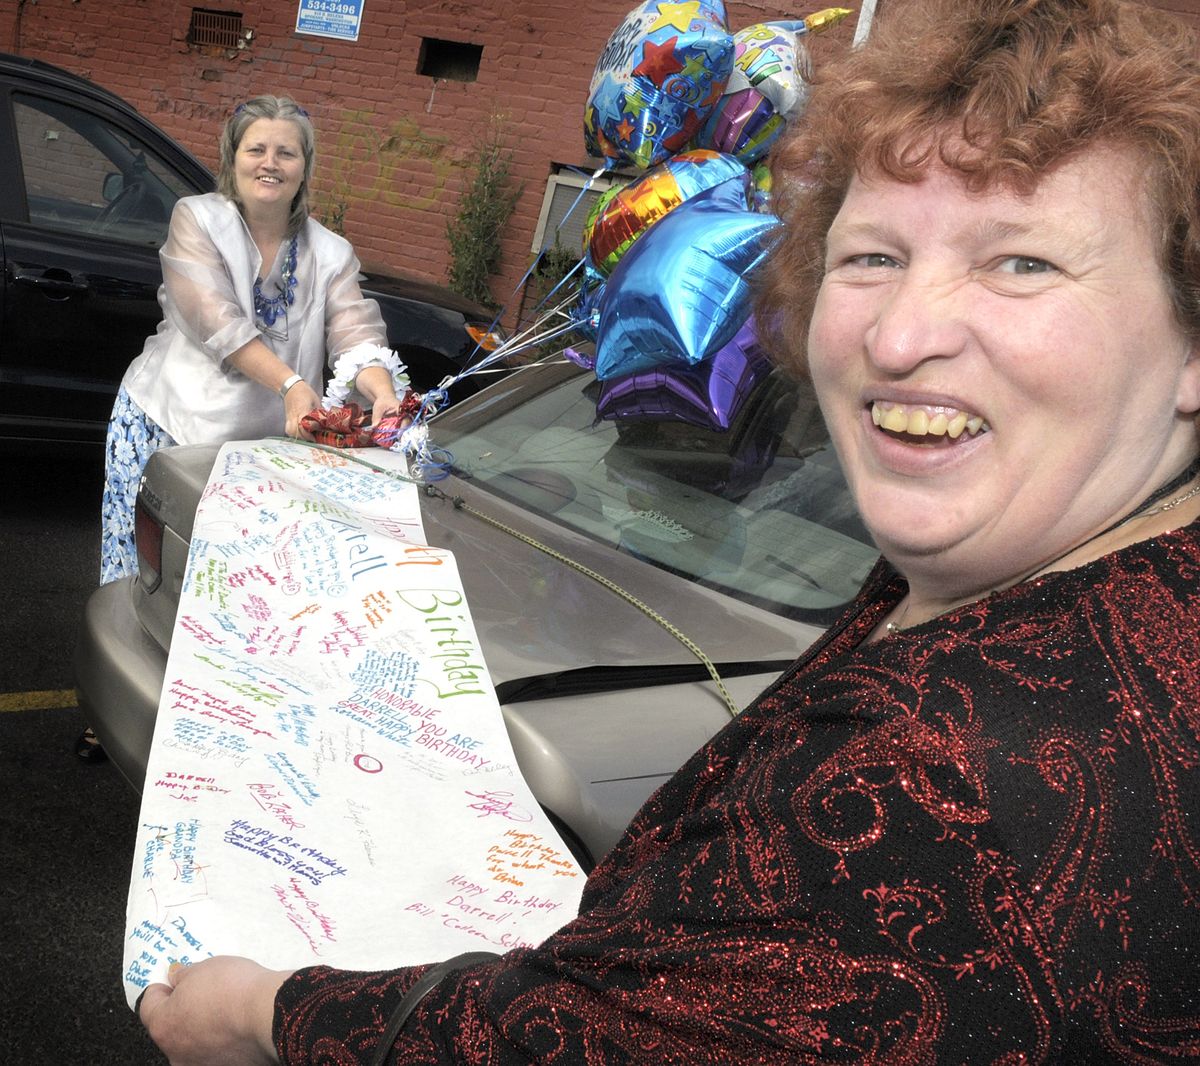 Lorraine White, left, and Linda Witty prepare a birthday surprise for Darrell Jones at The Donut Parade in Spokane. (Christopher Anderson / The Spokesman-Review)